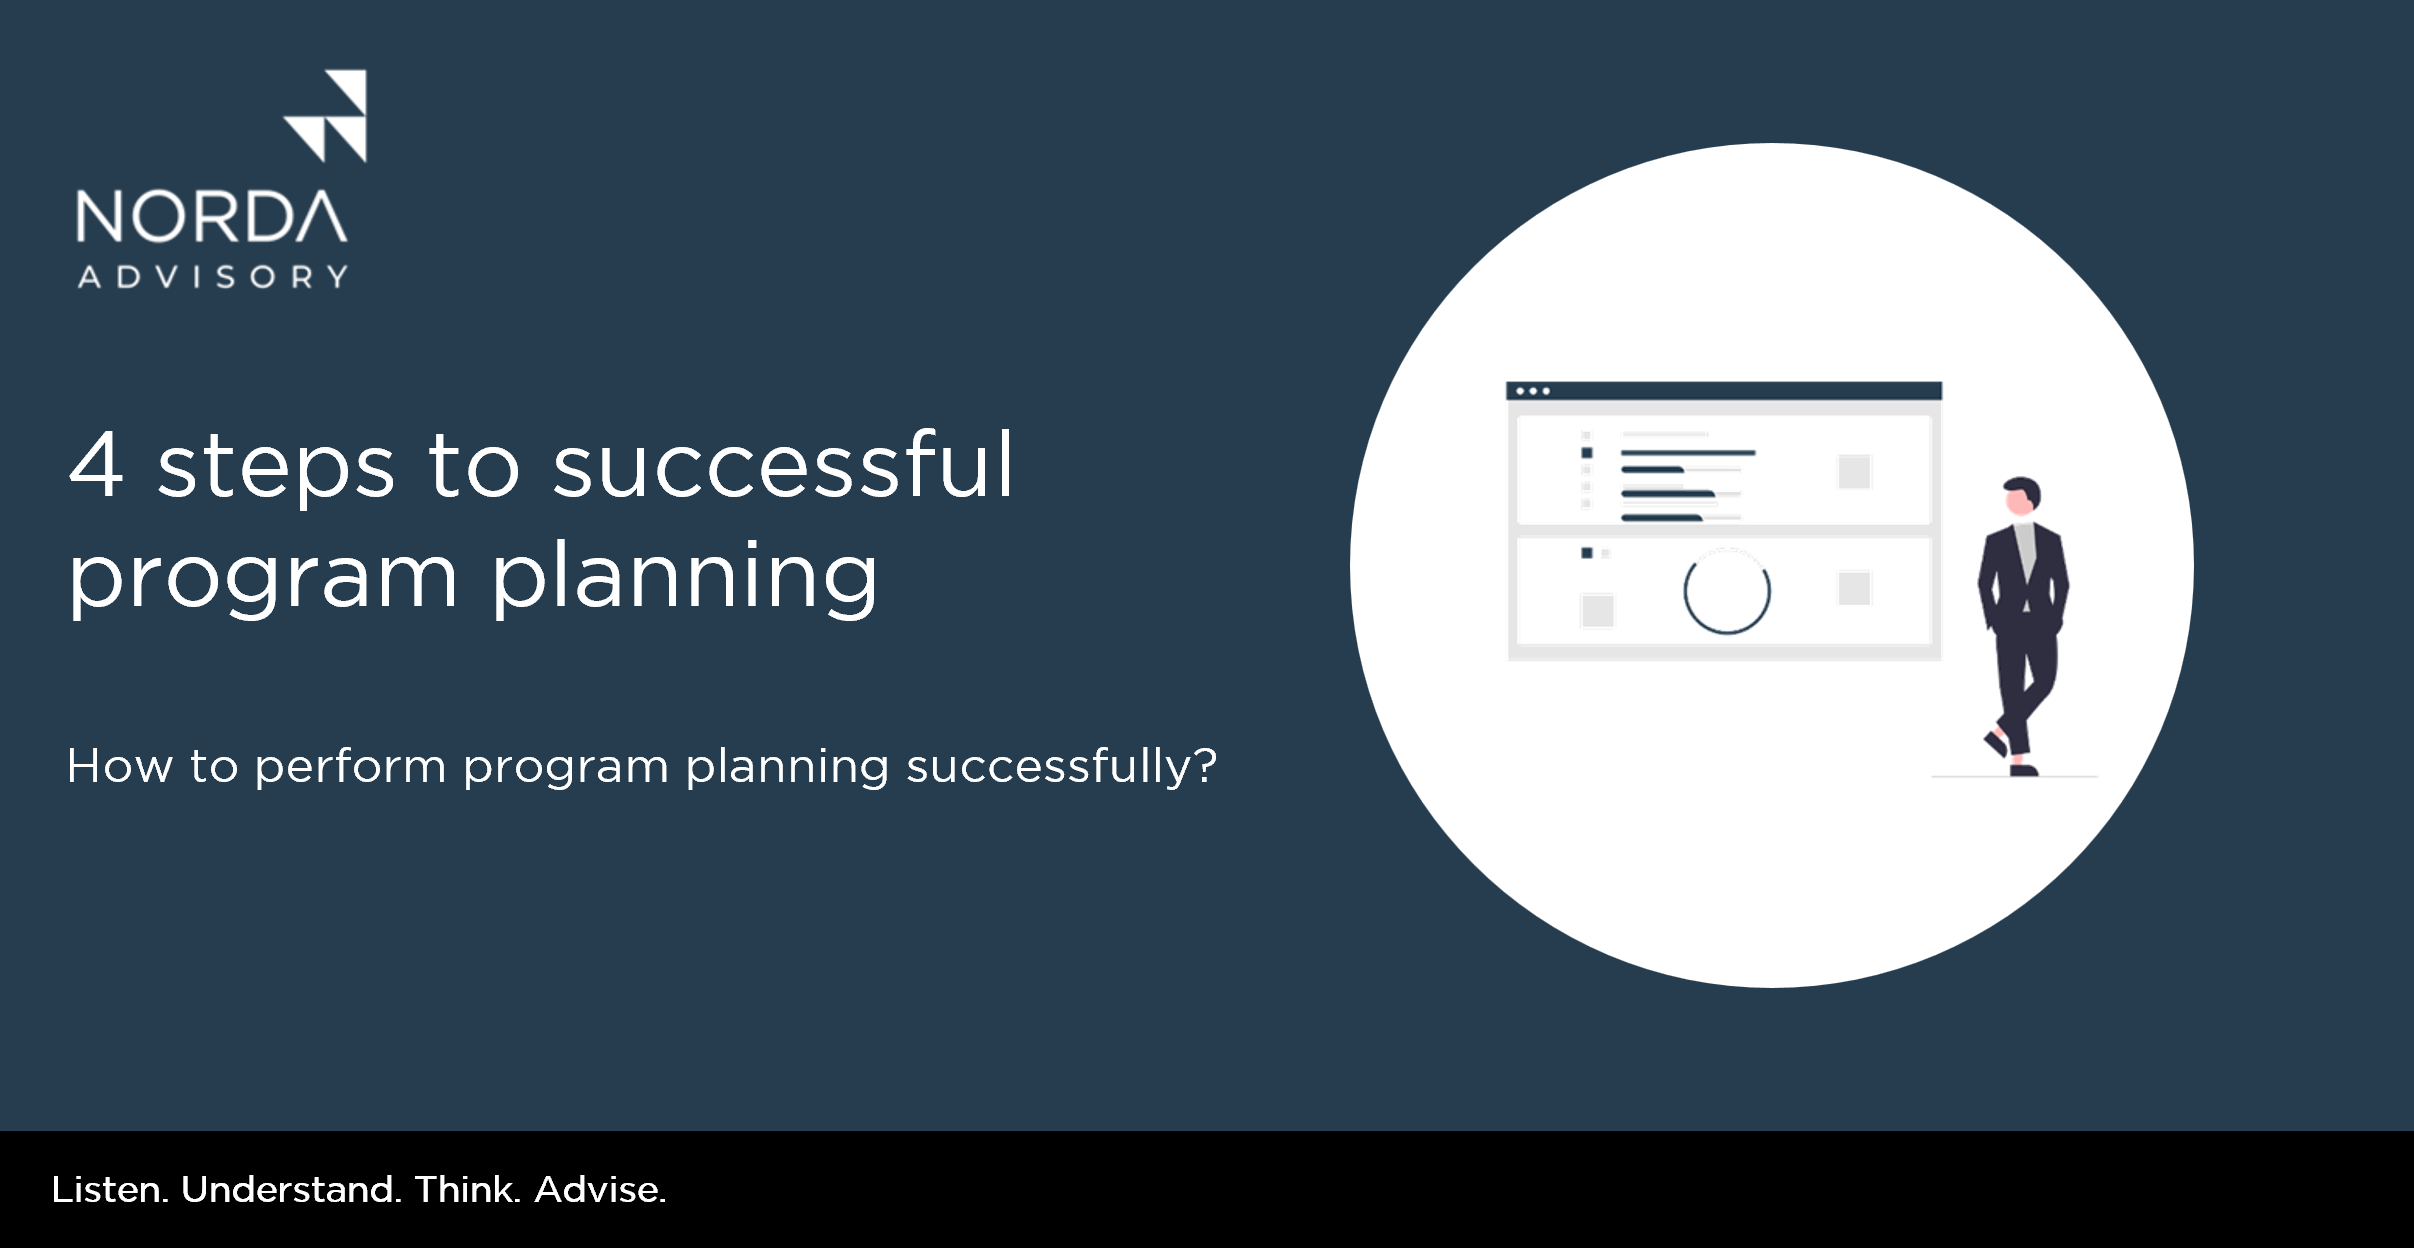 4 steps to successful program planning